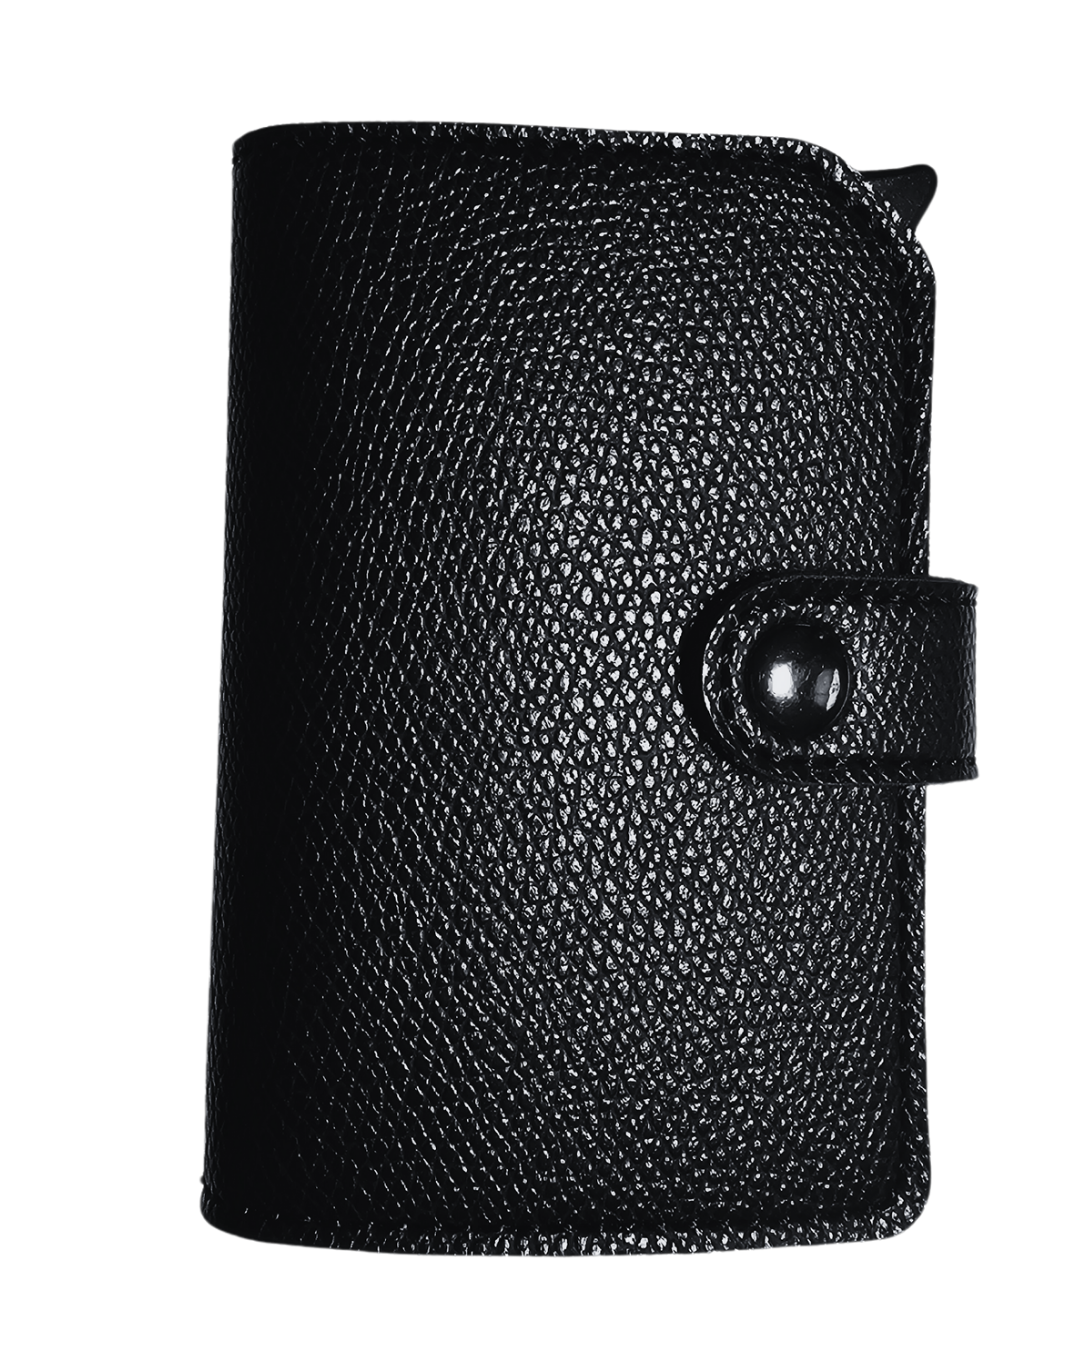 image of black RFID card wallet. the wallet can hold up to 5 cards, it has a metal aluminum case to hold the cards. there are 2 pockets to hold money and business cards, it is small and can fit into your pocket.